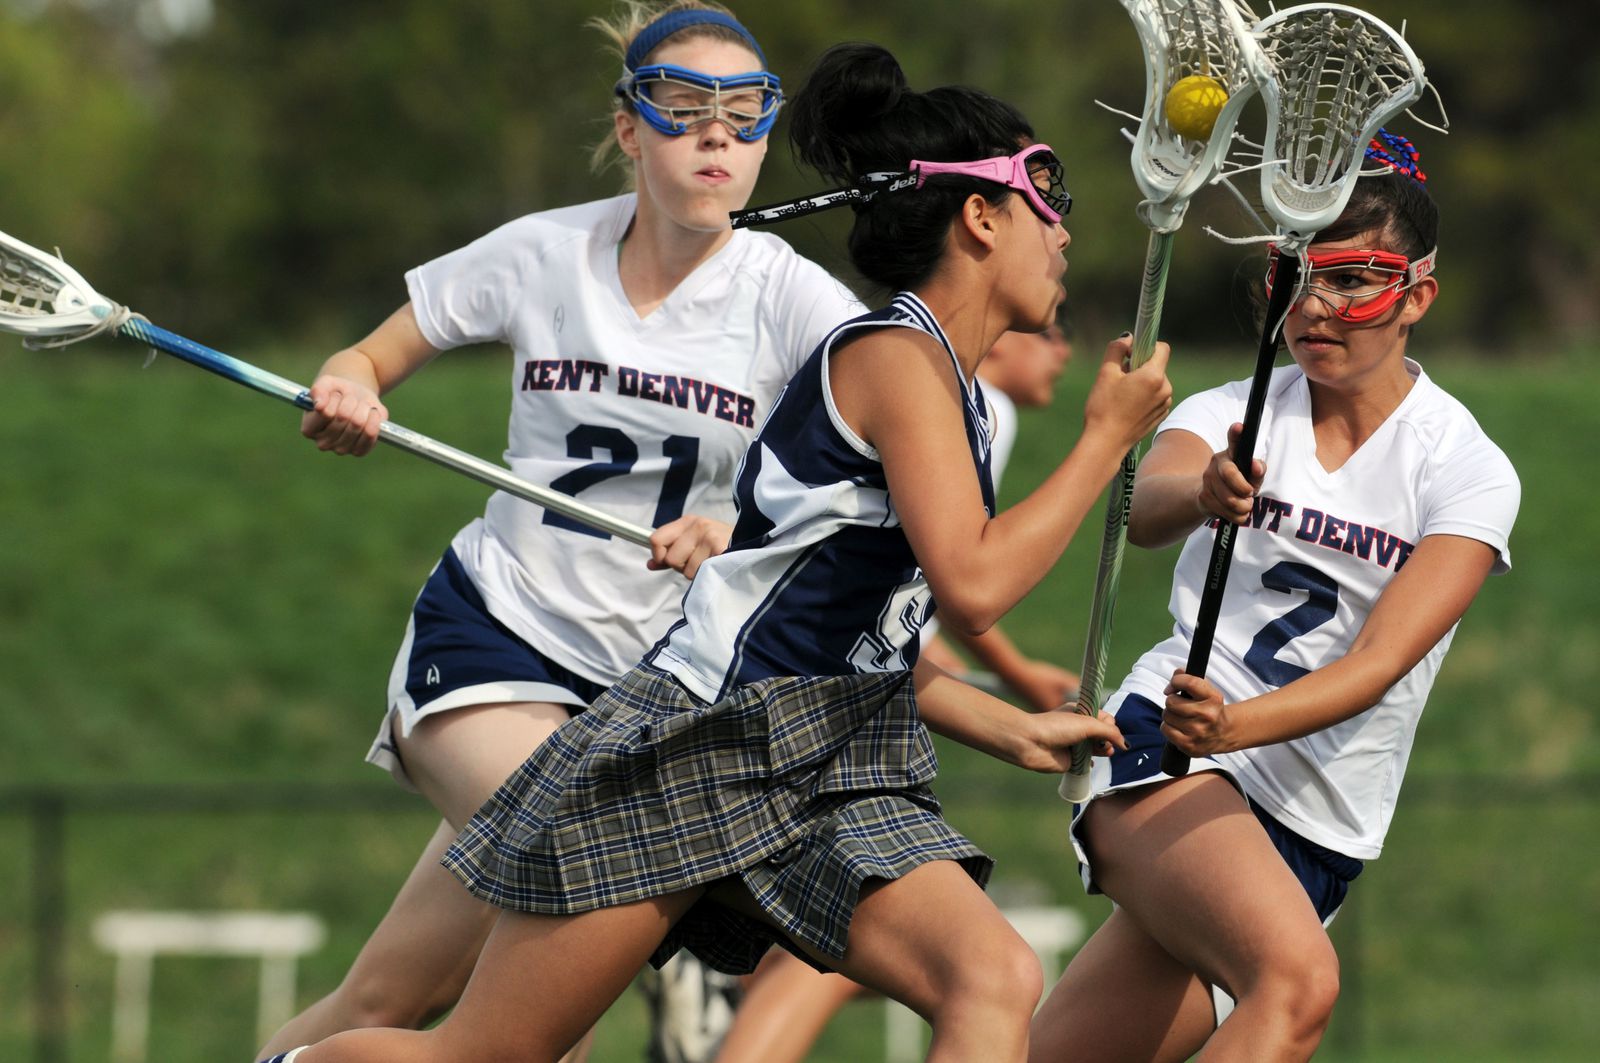 How to construct a rebound wall in Lacrosse